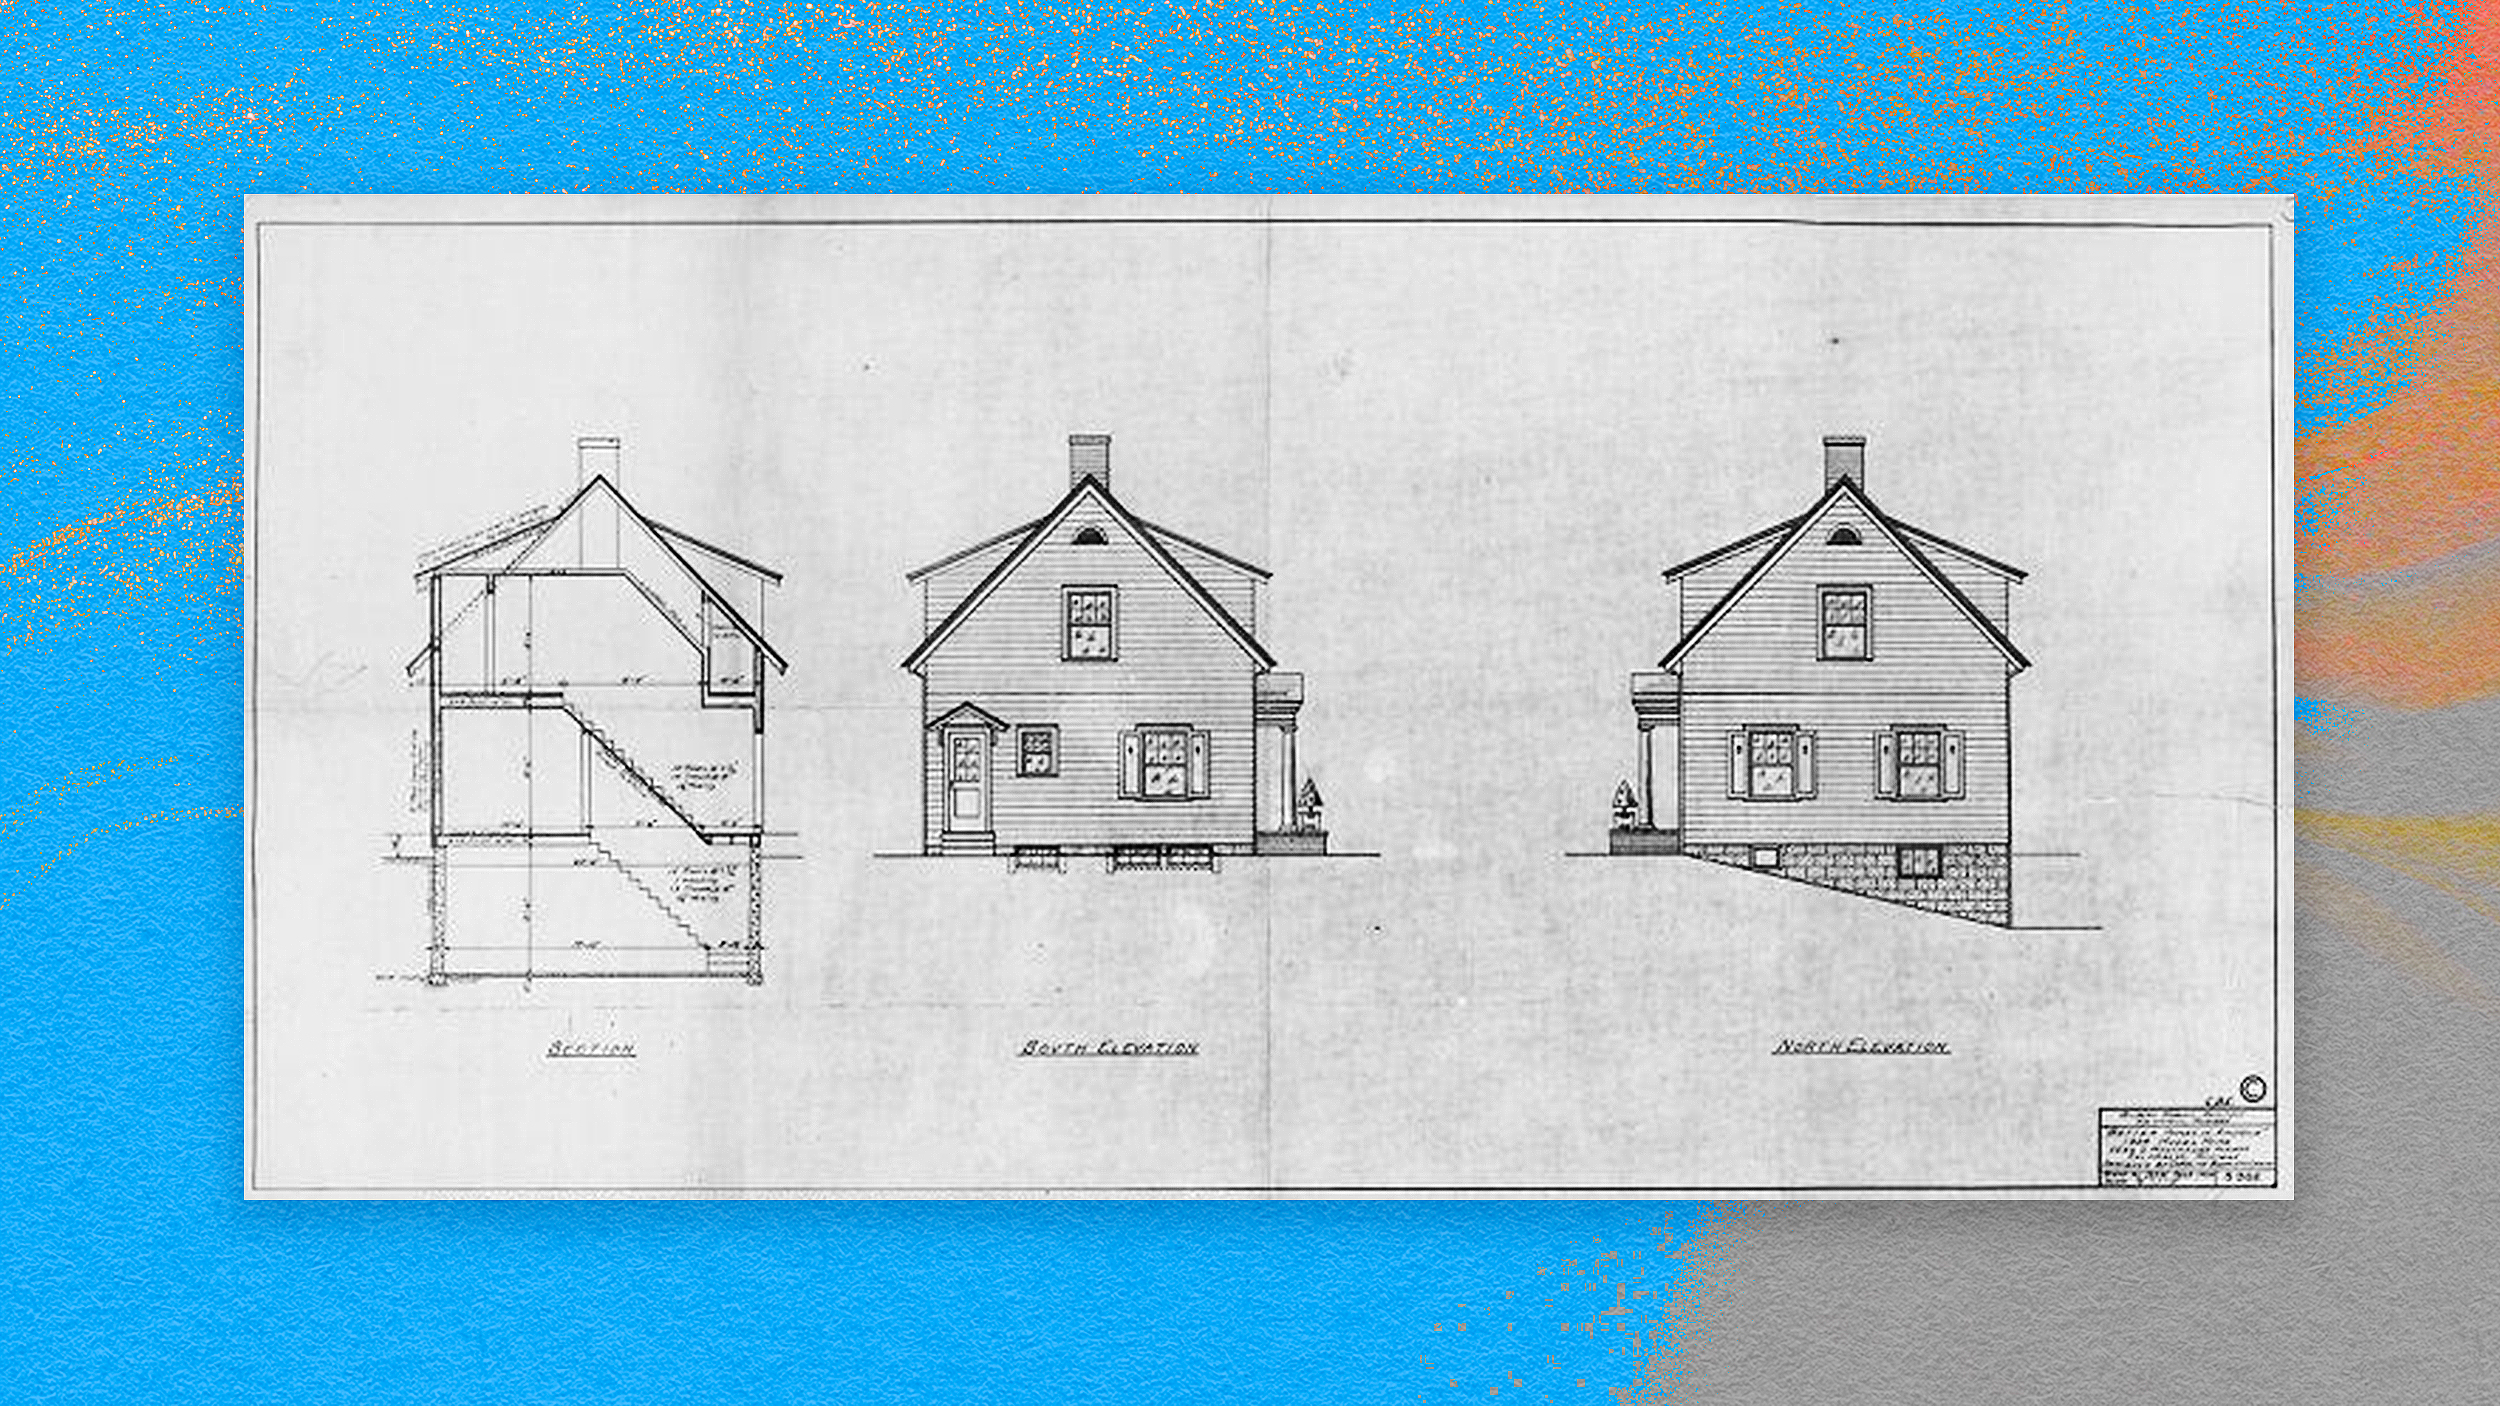 Two tiny house drawings on a blue background.